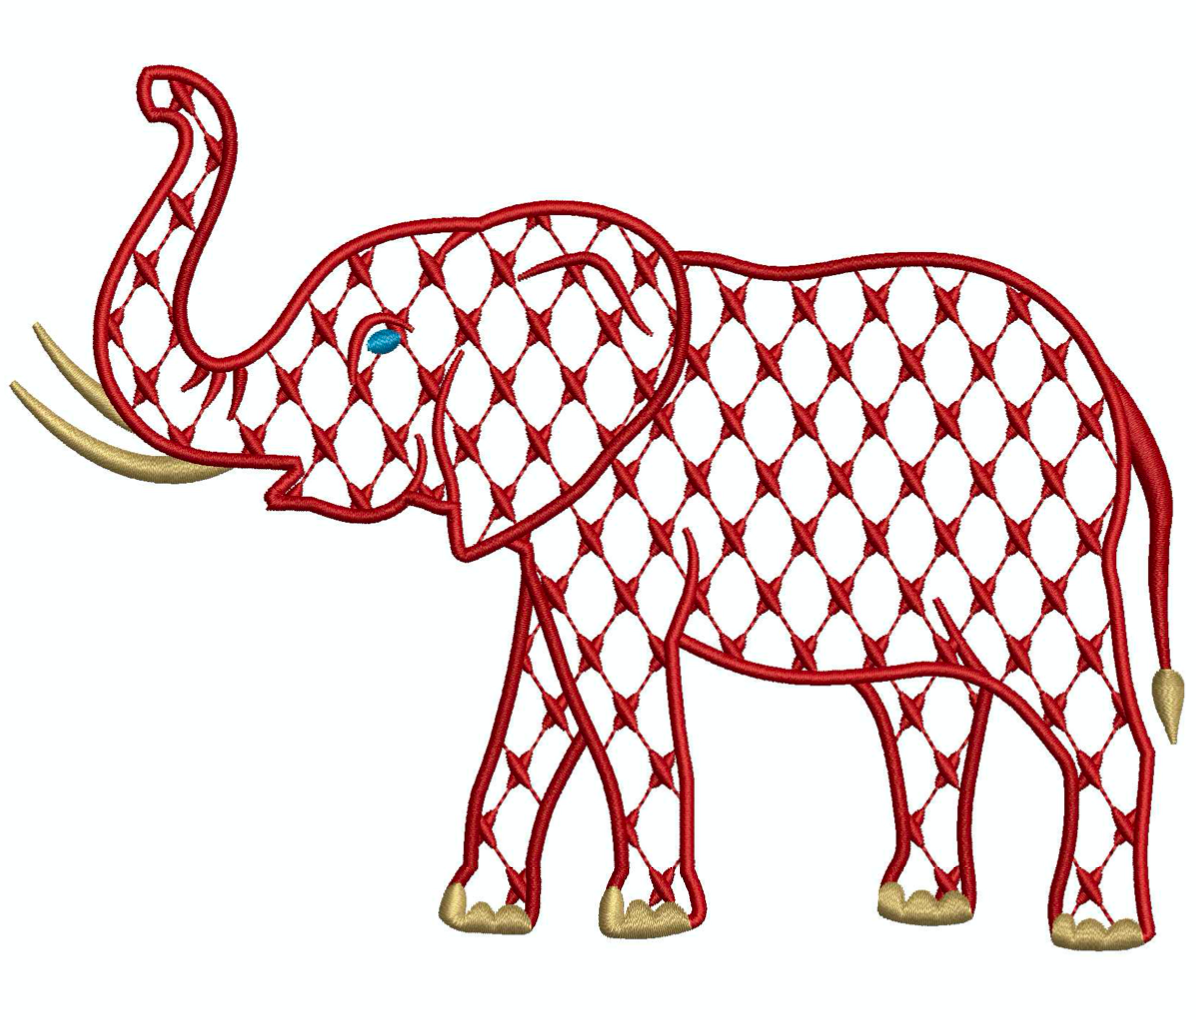 Chic Elephant II for Embroidery